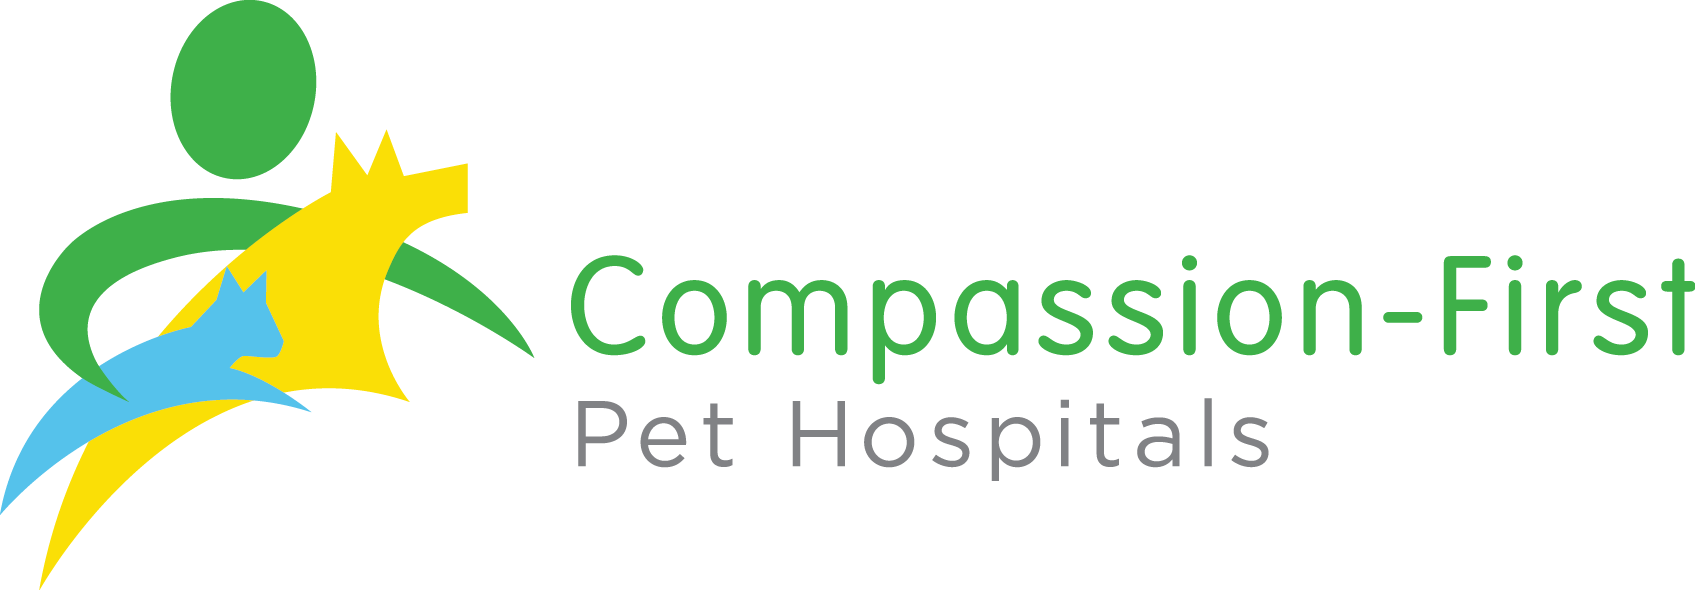 Compassion-First Welcomes Three New Pet Hospitals to Its Growing Family of U.S. Based Hospitals